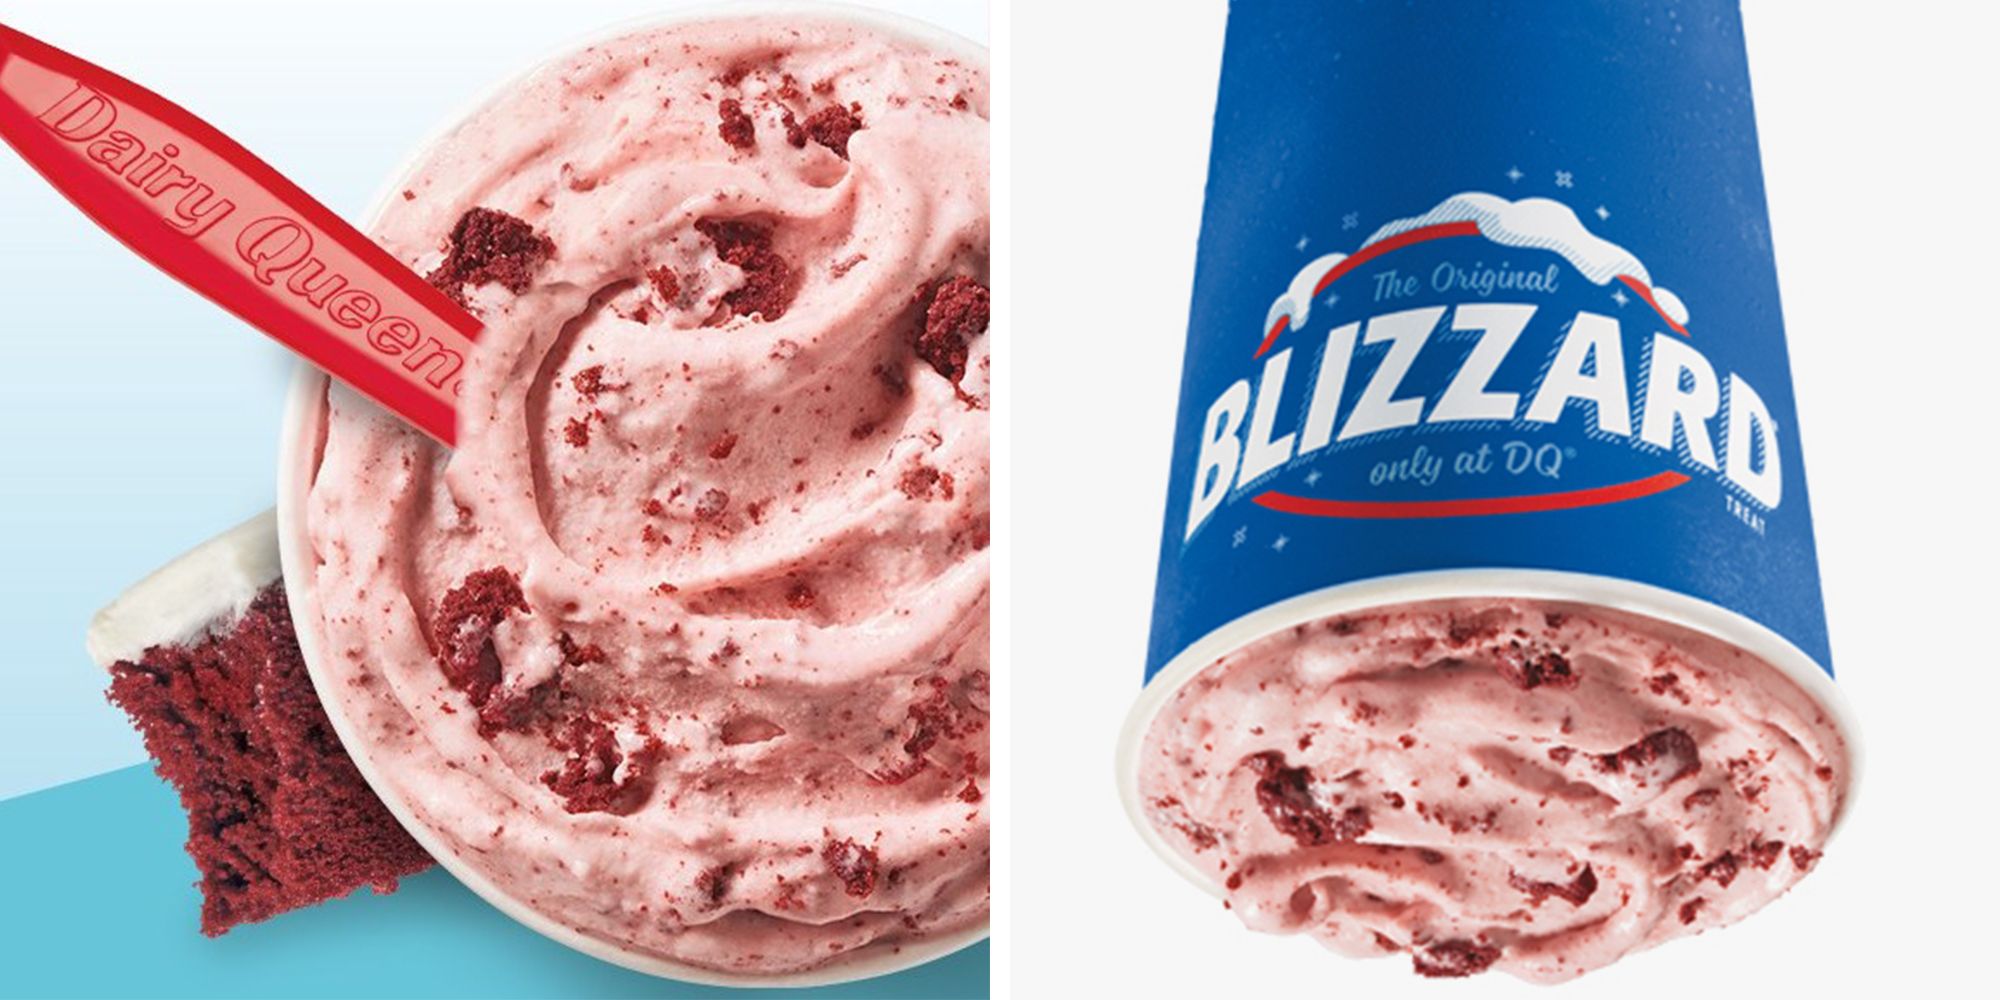 Dairy Queen's Red Velvet Cake Blizzard Is Swirled With Cake Pieces and Cream Cheese Icing